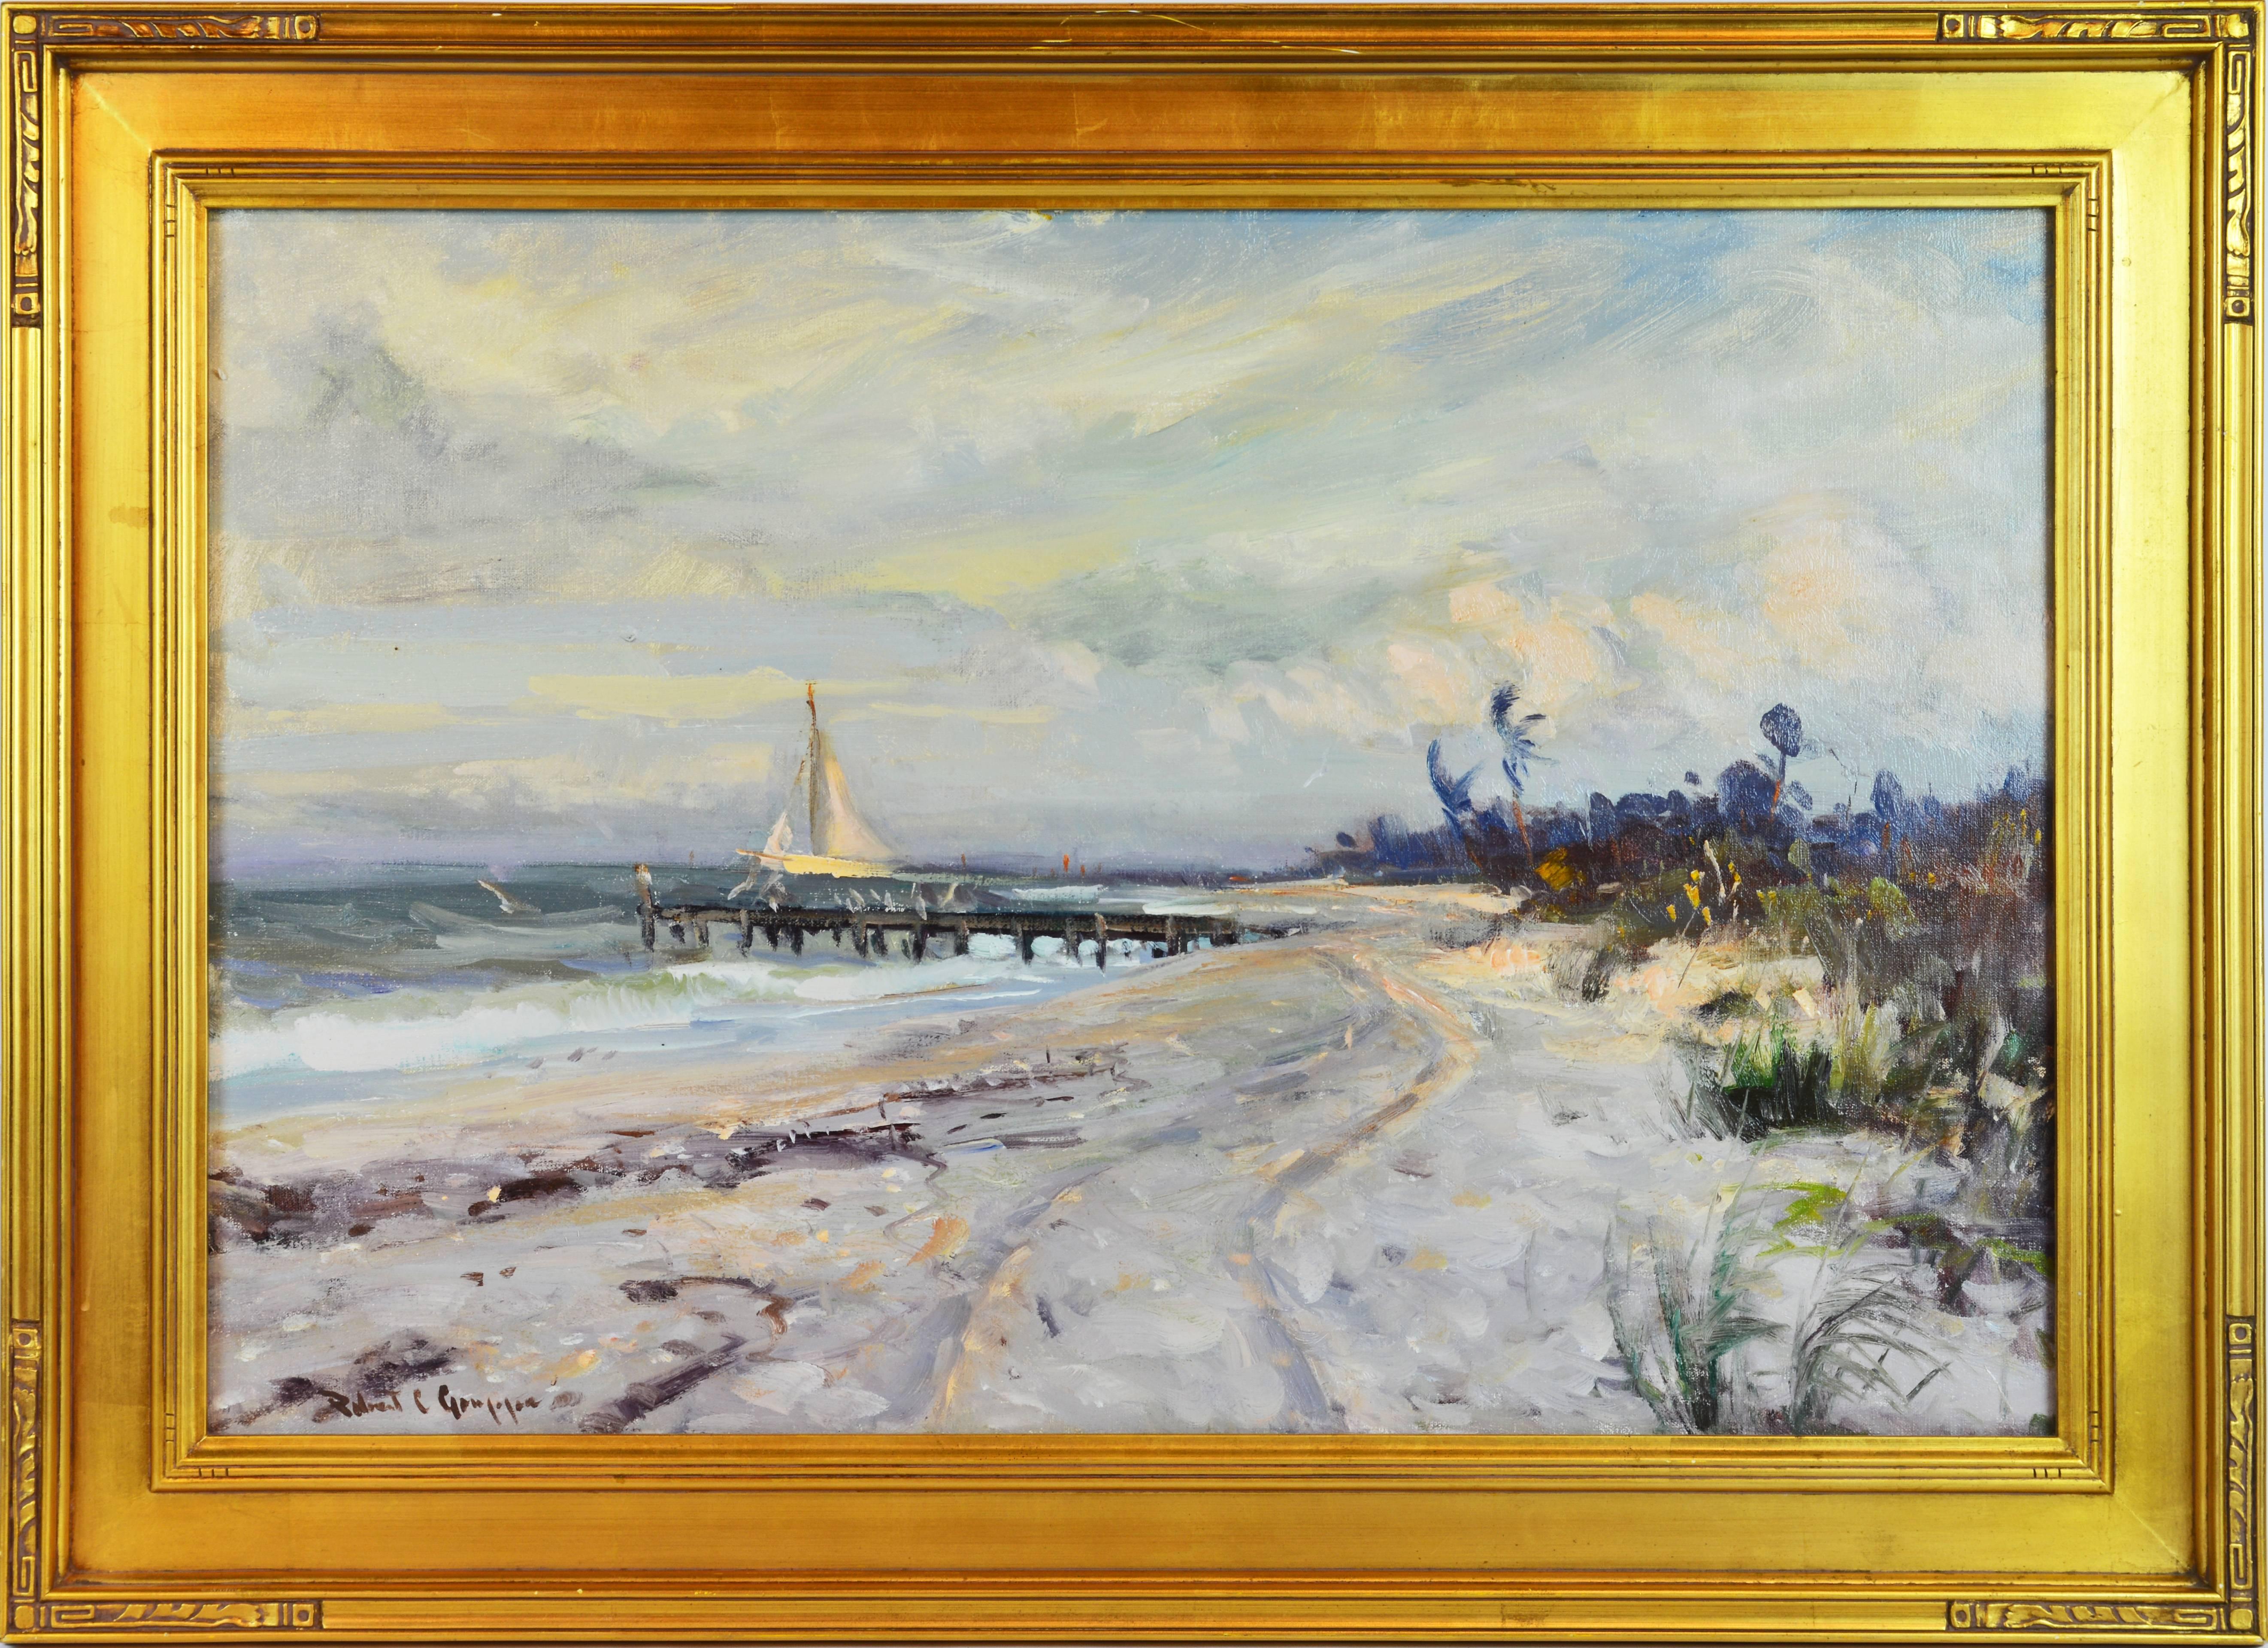 'Along the Gulf'
By Robert C. Gruppe, American b. 1944.
Measures: 24 x 36 inches with frame, 31 x 43 inches including frame.
Oil on canvas, signed.
Housed in an Arts & Craft style vintage frame.

Robert Charles Gruppe:
Being third generation